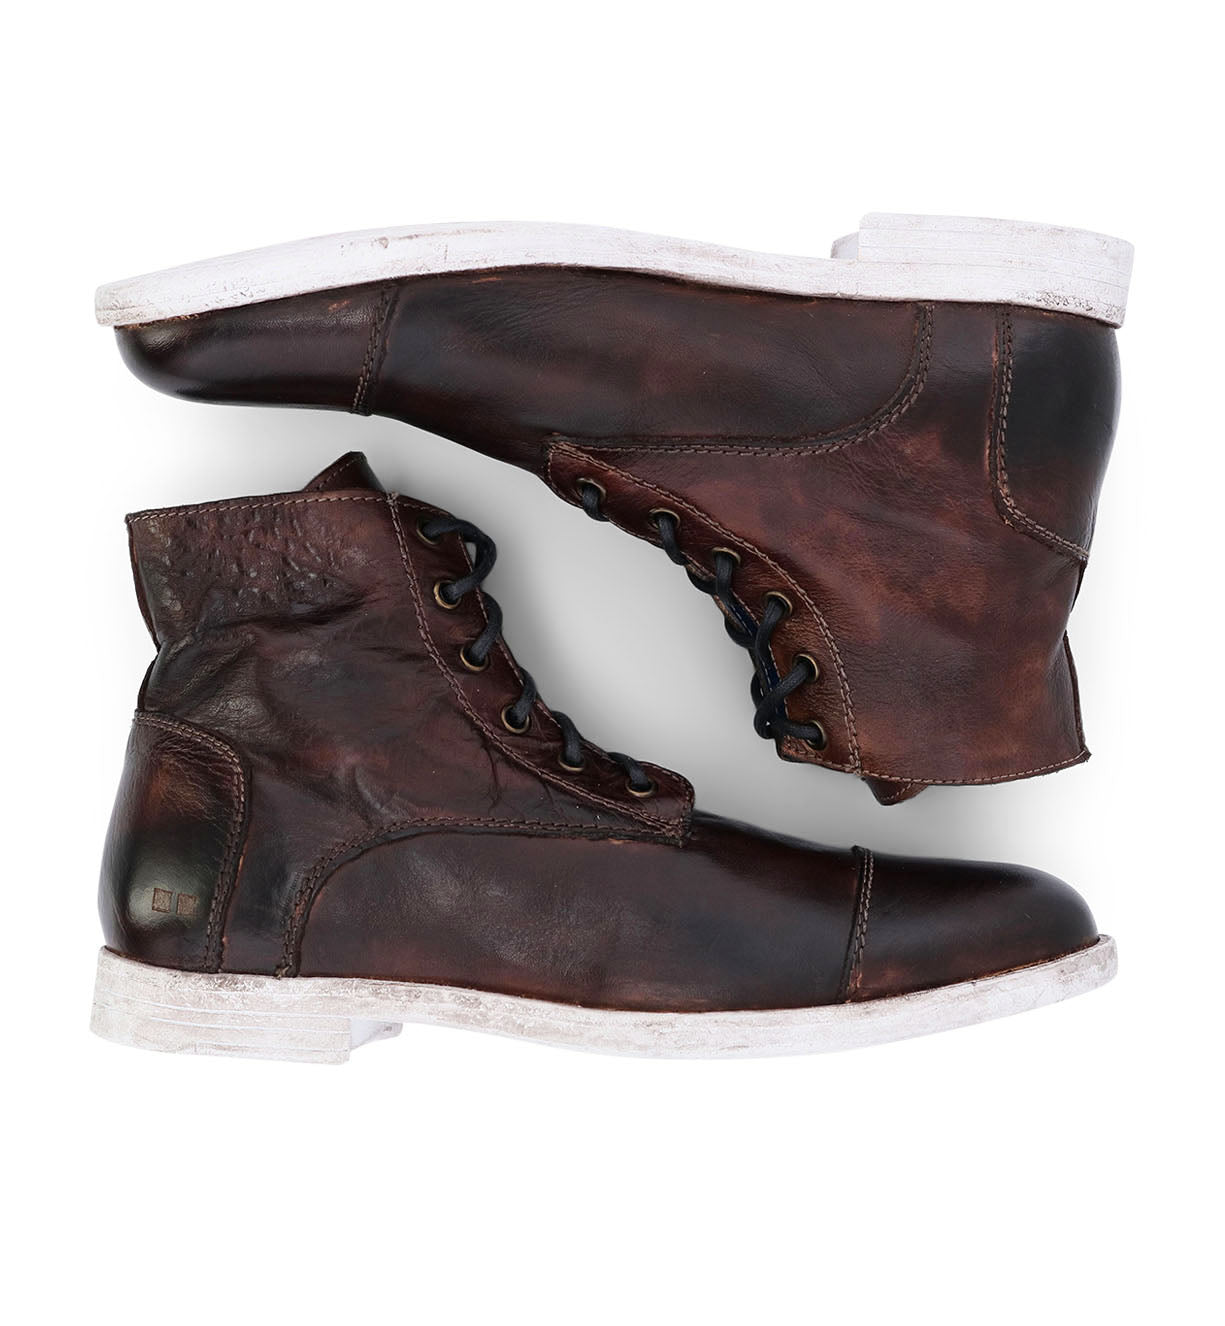 A pair of Bed Stu Leonardo brown leather boots on a white background.